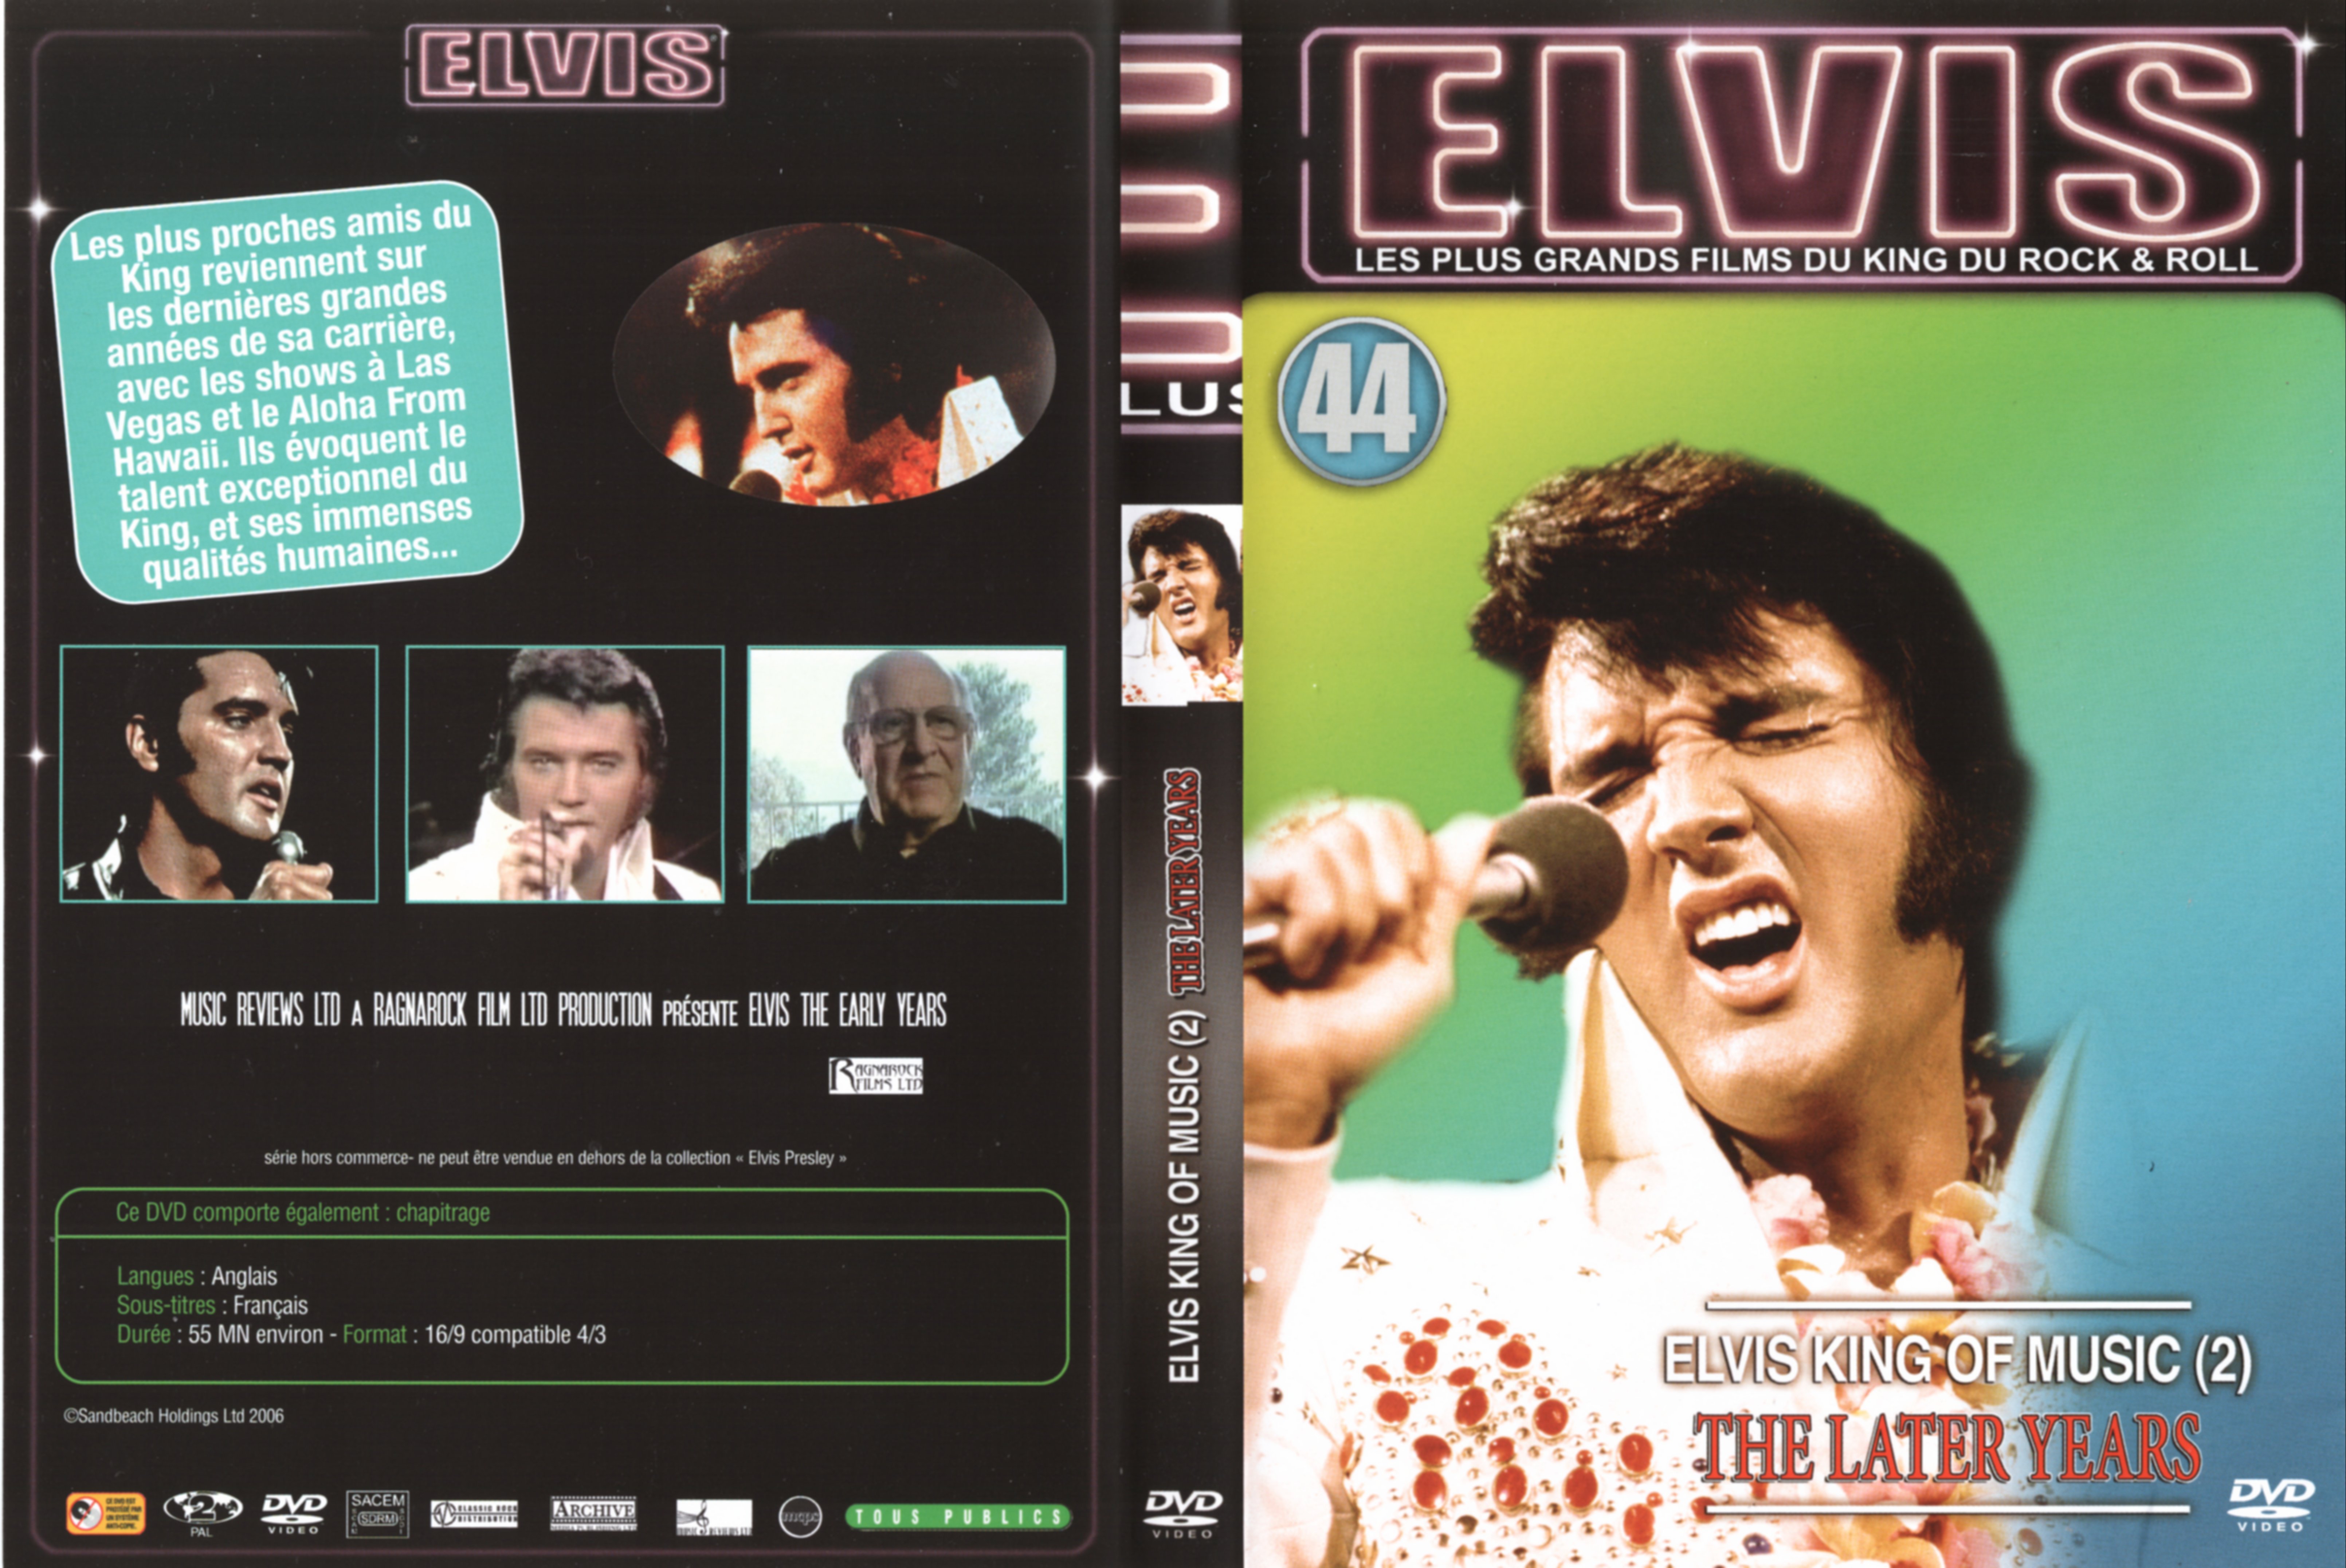 Jaquette DVD Elvis The later years